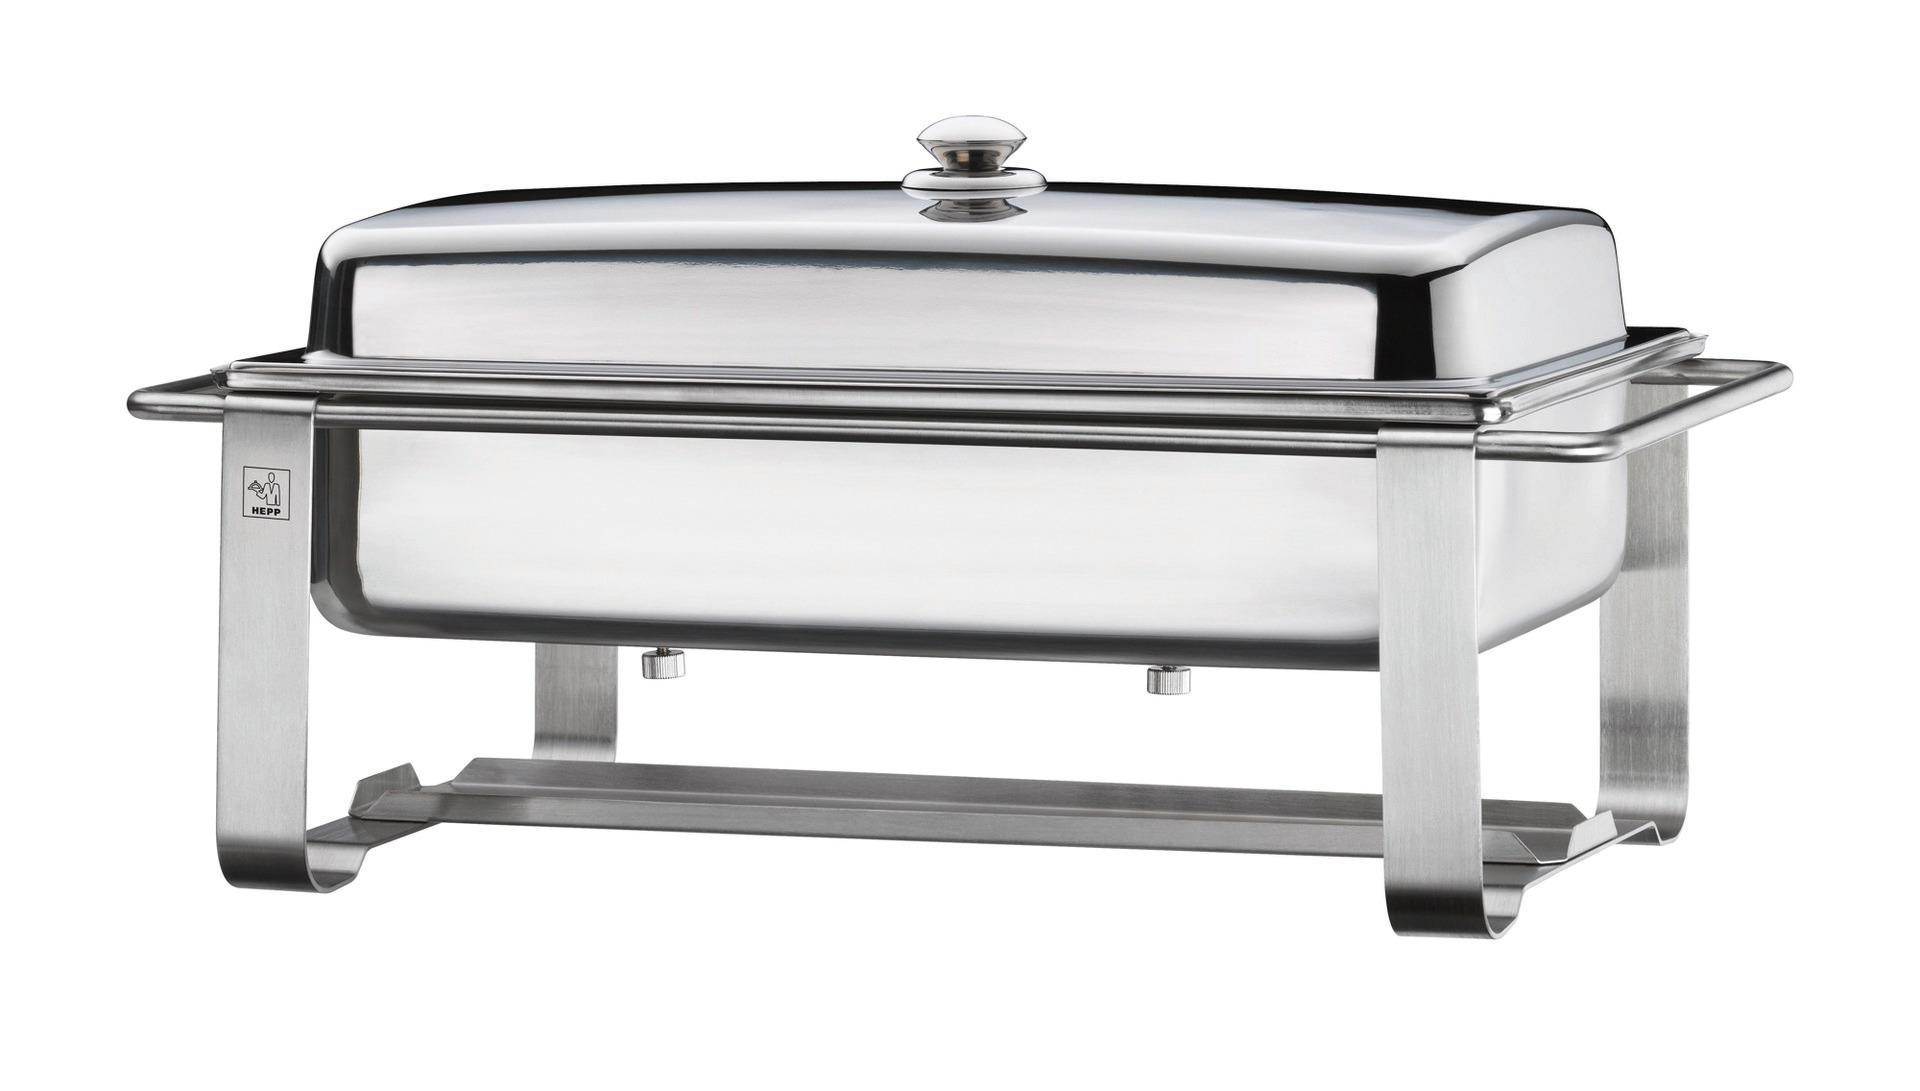 GN-Chafing Dish GN 1/1 640 x 348 x 321mm mit abnehmbarer Haube